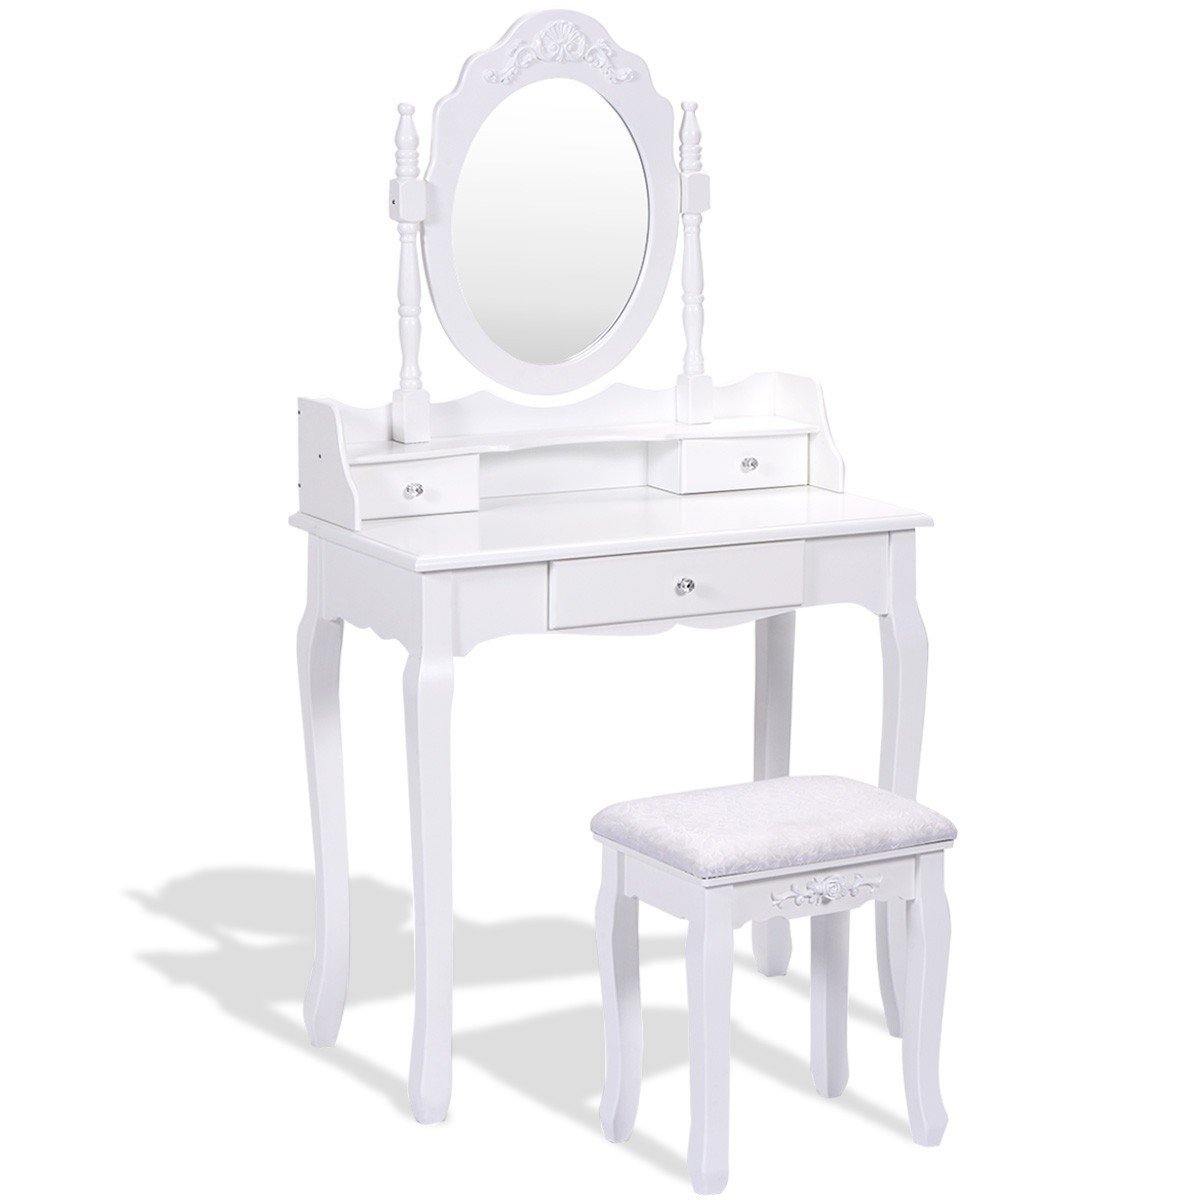 Vanity Table Set with Mirror and Stool for Bedroom 3 Drawers (White) - Giantexus